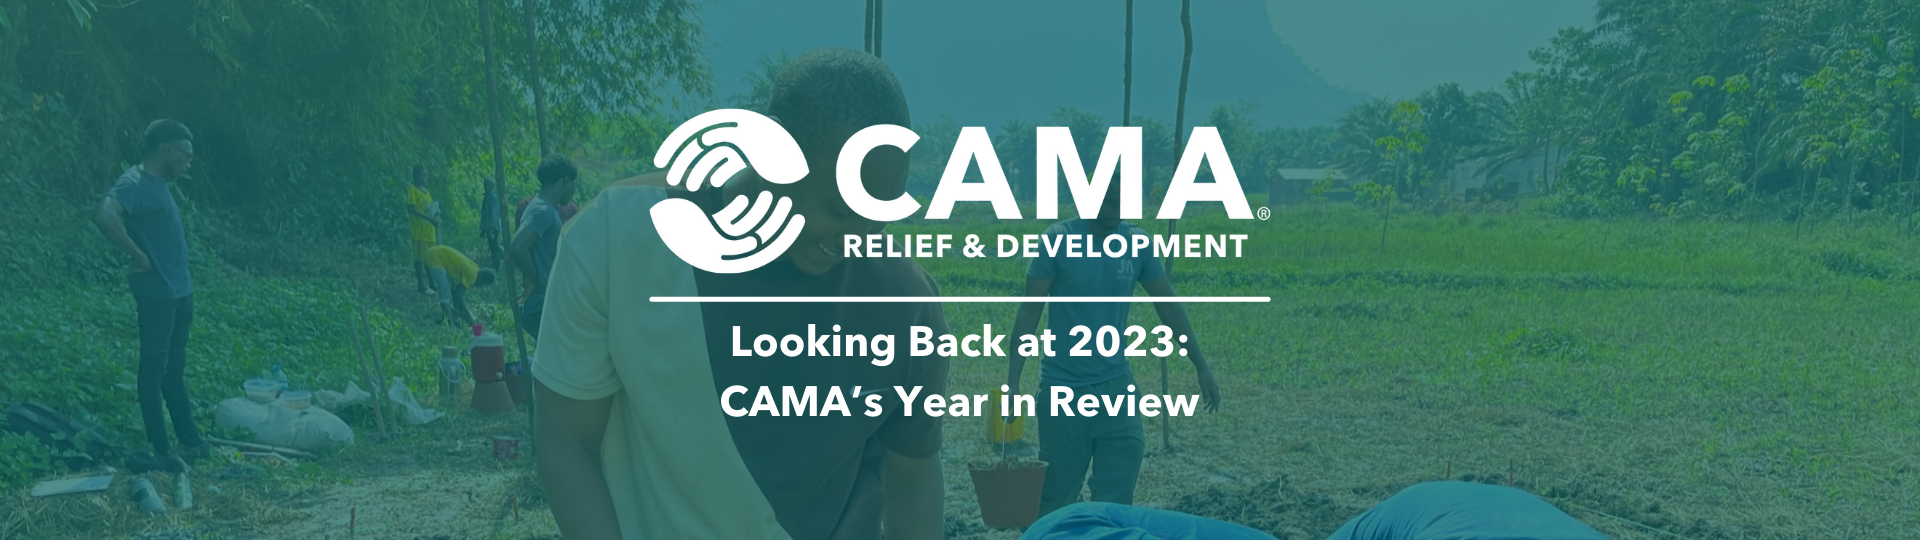 CAMA’s 2023 Year in Review